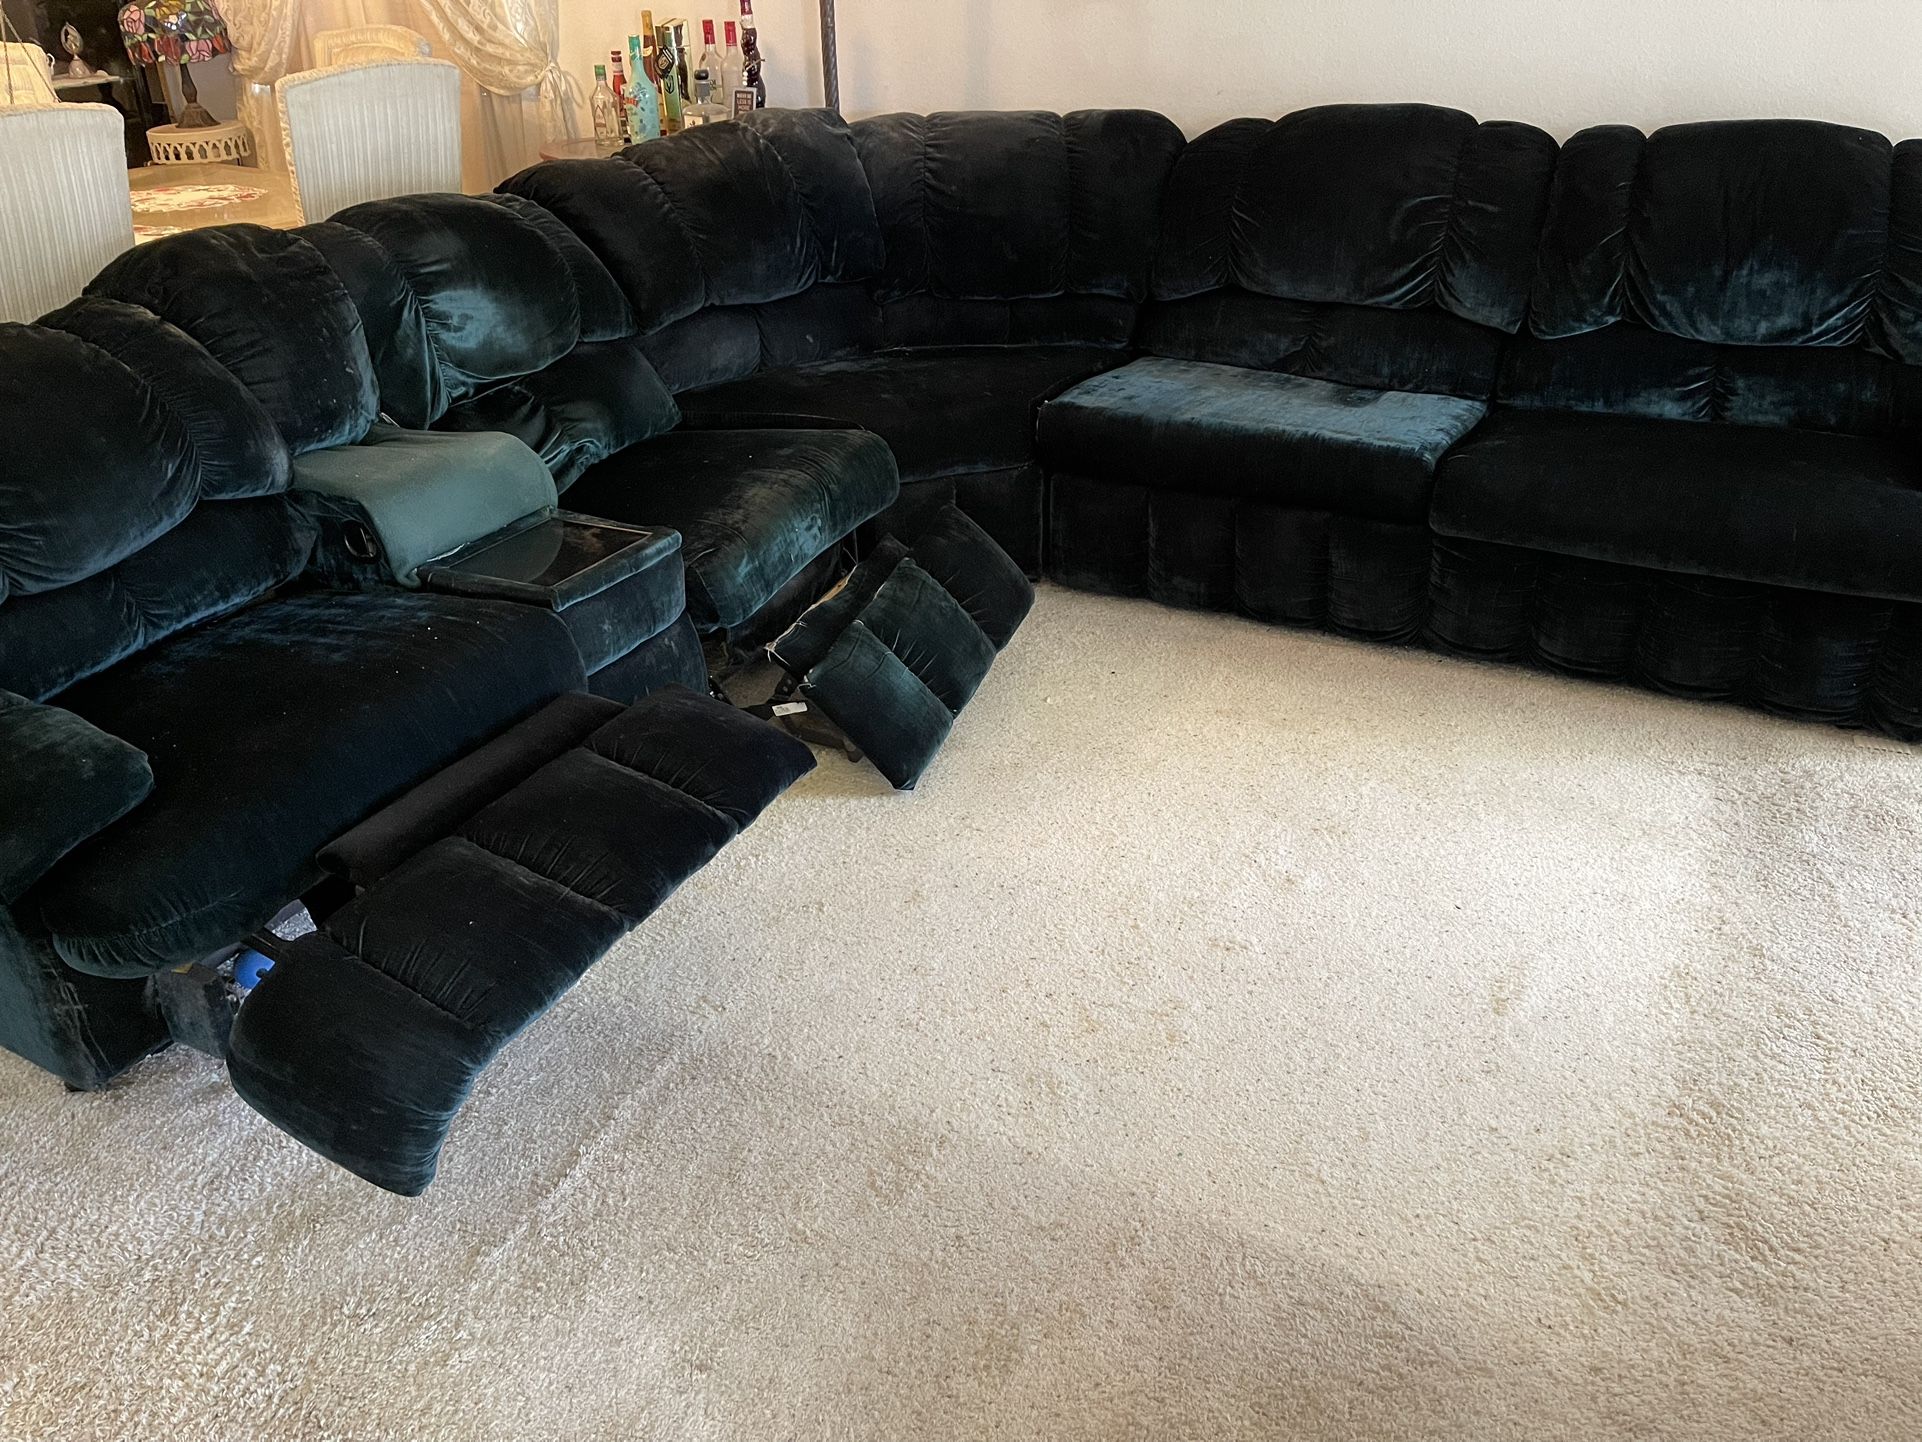 Sleeper Sofa And Recliner Sectional.    Free.   (Take One With Sleeper Bed In Good Shape ) If You Like 